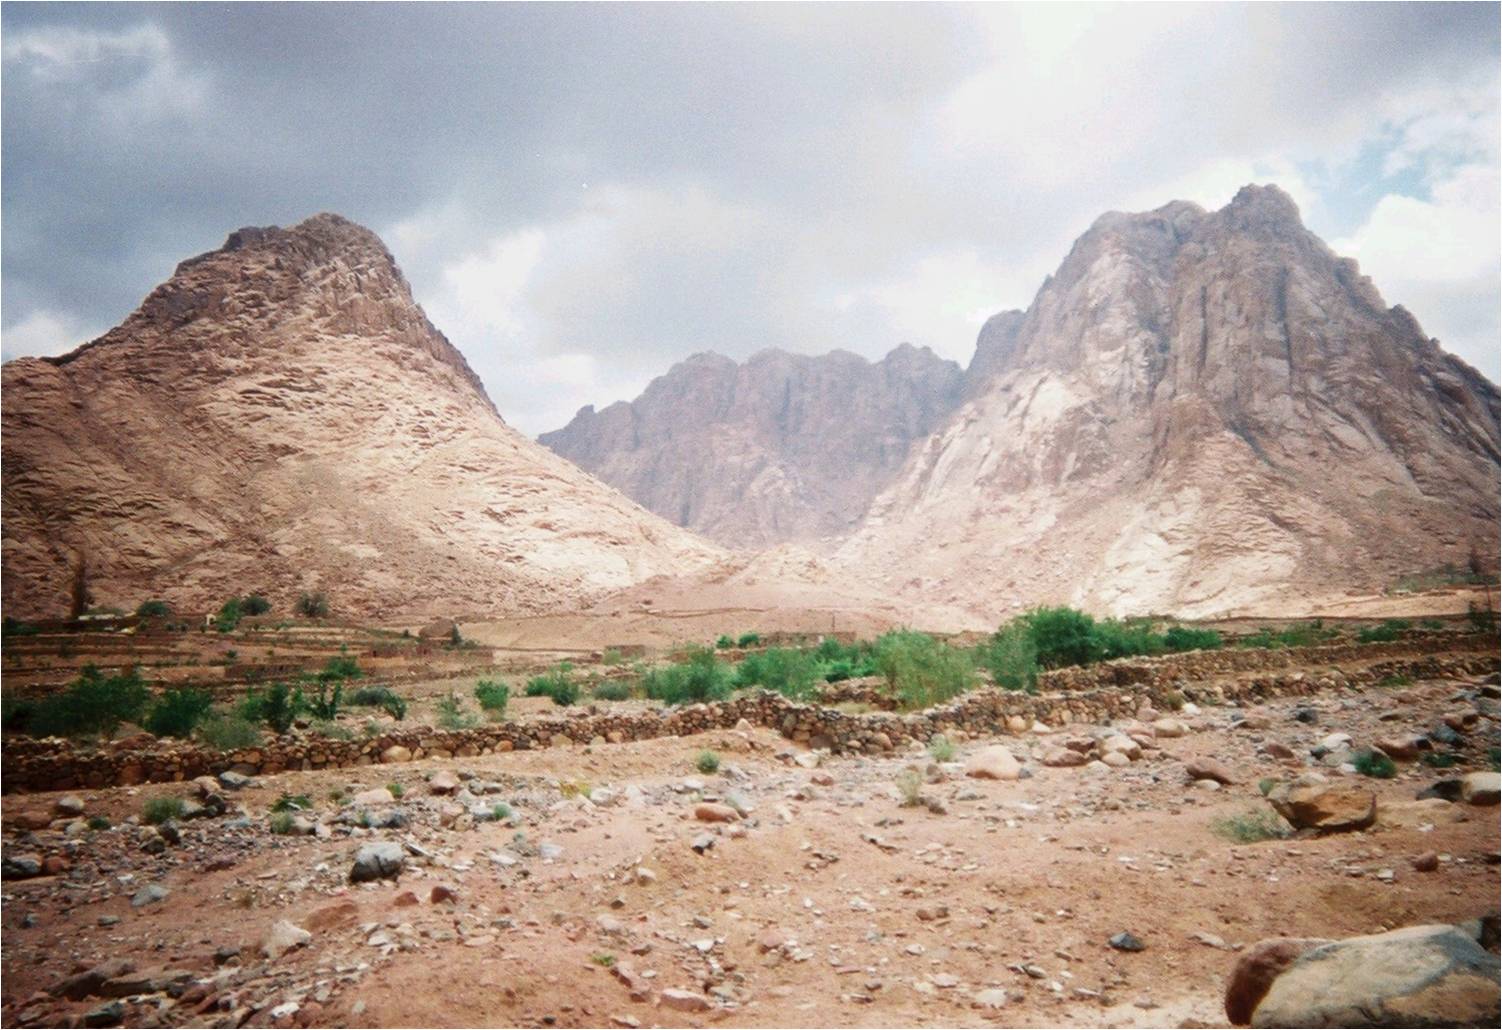 View from Bedouin house, Mount Saint Catherine